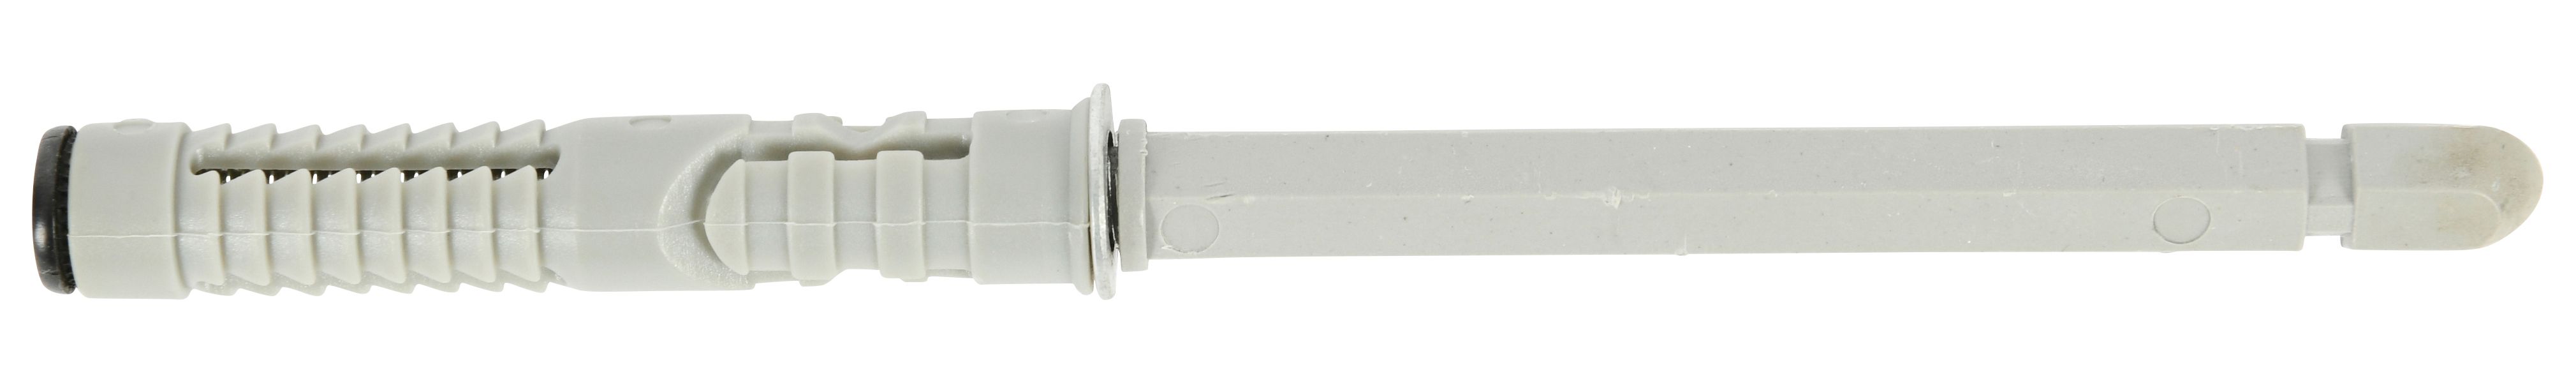 Image of Floating Shelf Supporting Bracket Pair - 120 x 12mm